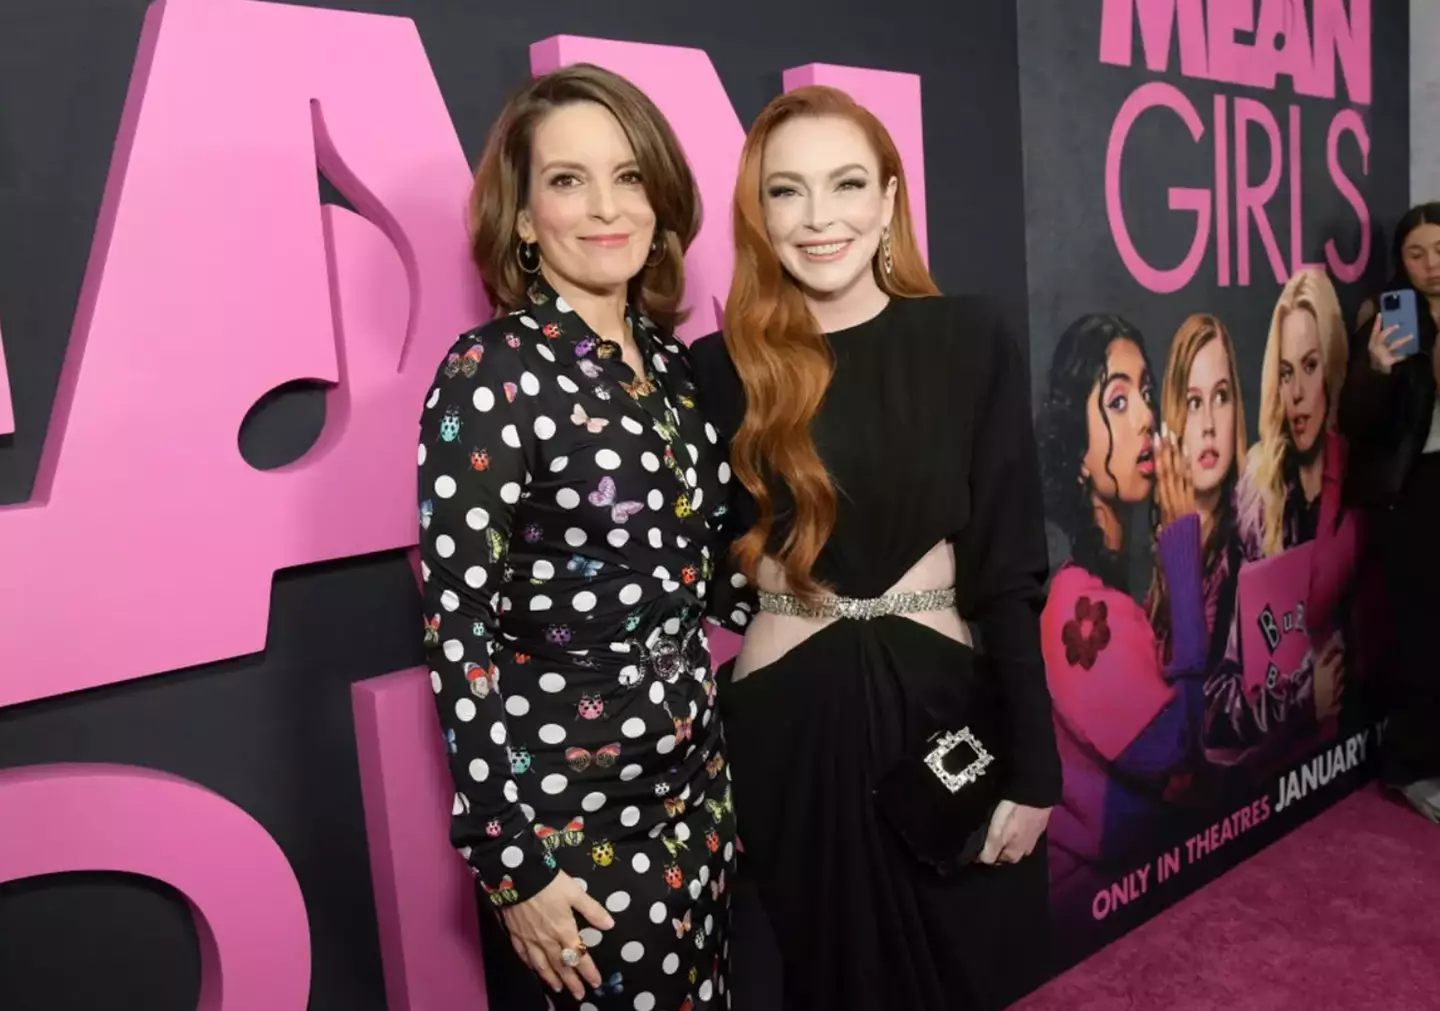 Lindsay Lohan and Tina Fey at the Mean Girls premiere.